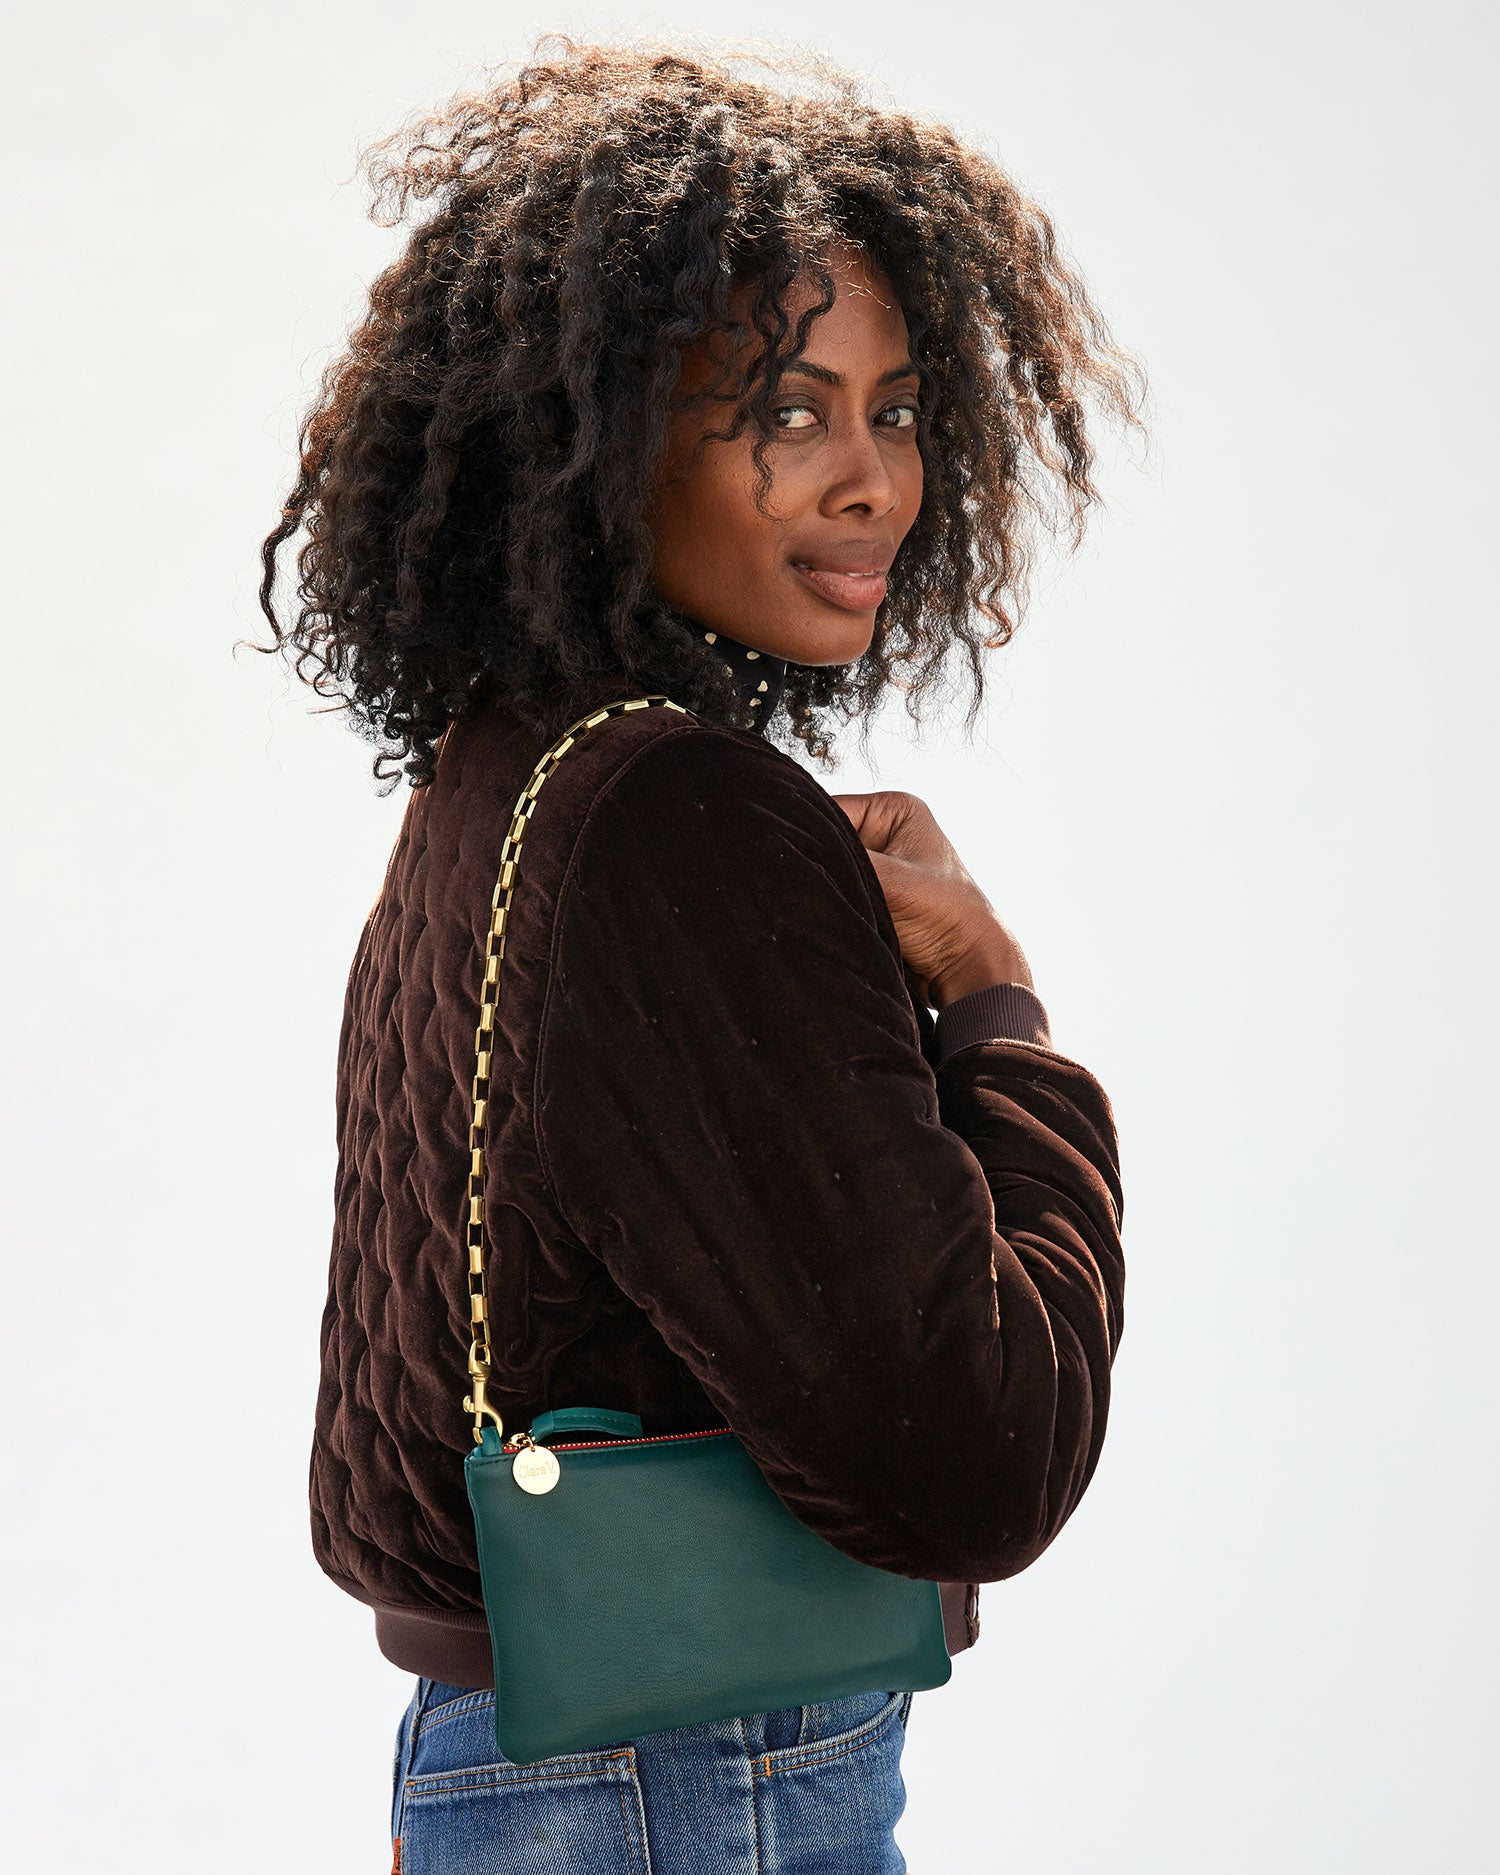 Mecca carrying the Deep Sea Wallet Clutch with Tabs by the Brass Box Chain Shoulder Strap